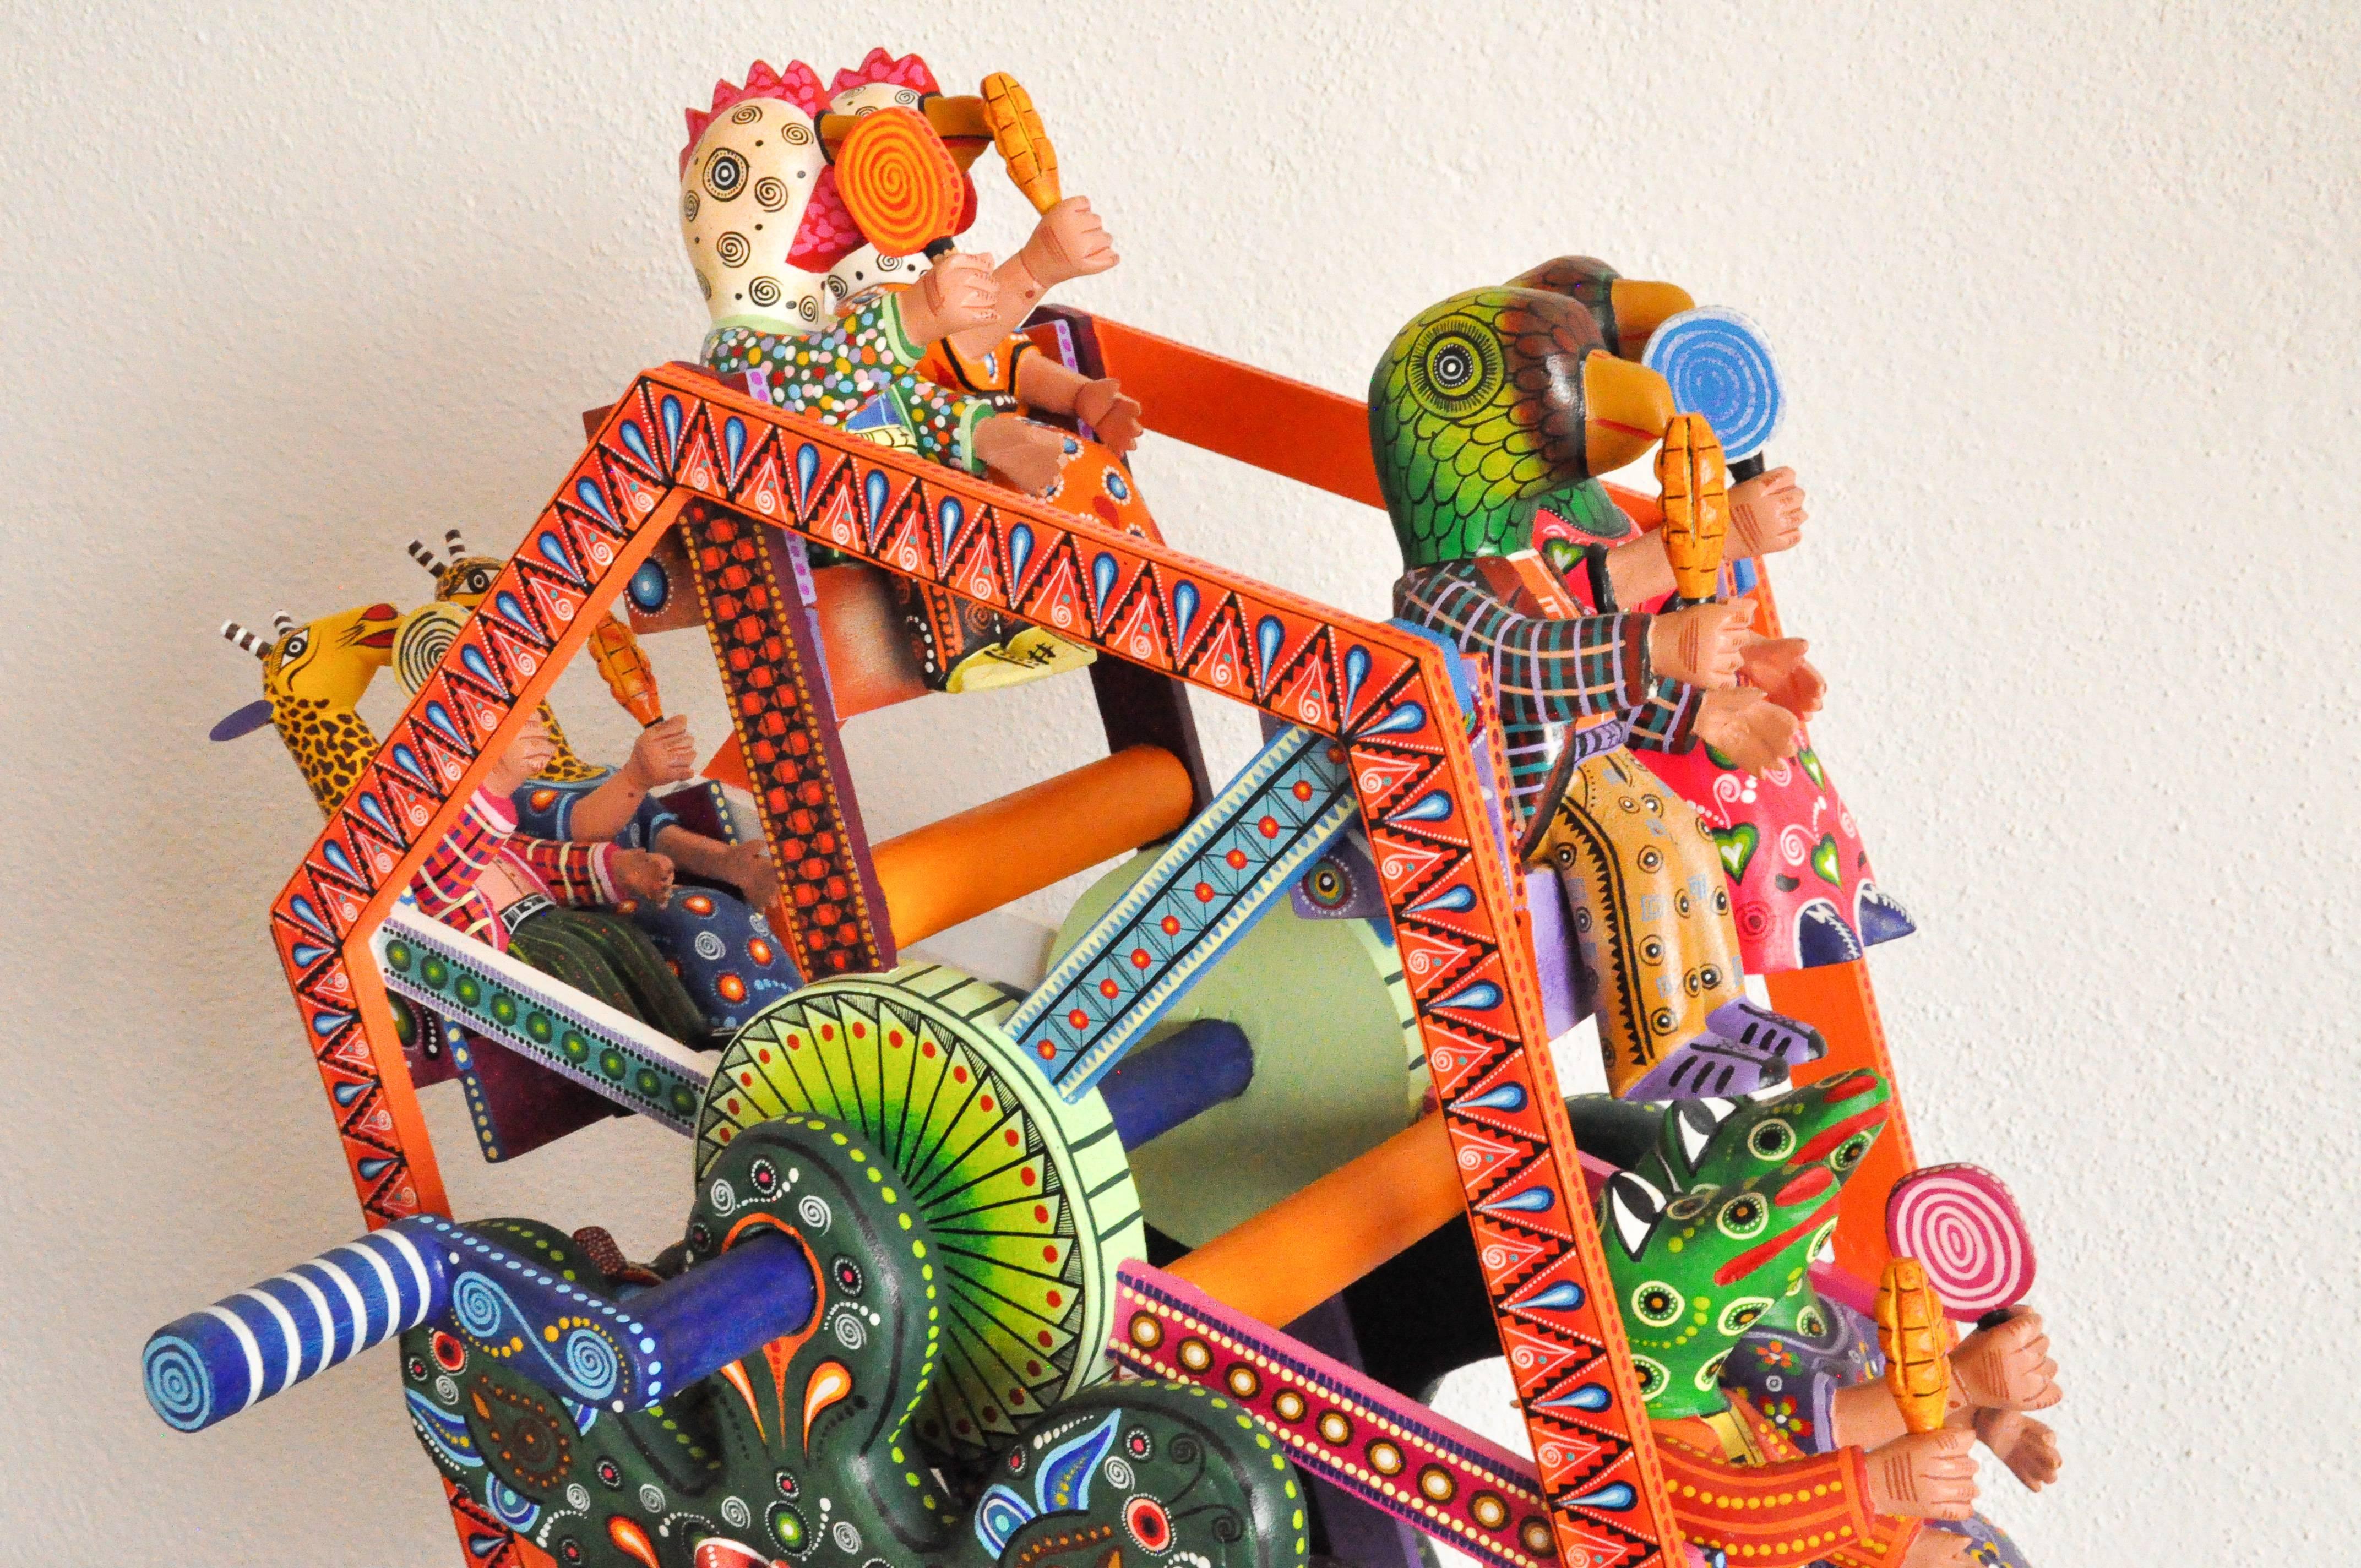 This colorful fortune wheel alebrije is made by Agustín Cruz Tinoco in Oaxaca Mexico. 

“I came up with the idea as a toy for children,” says Mexican master wood carver Agustin Cruz Tinoco.

As Mr. Agustin watches children and their imaginations run